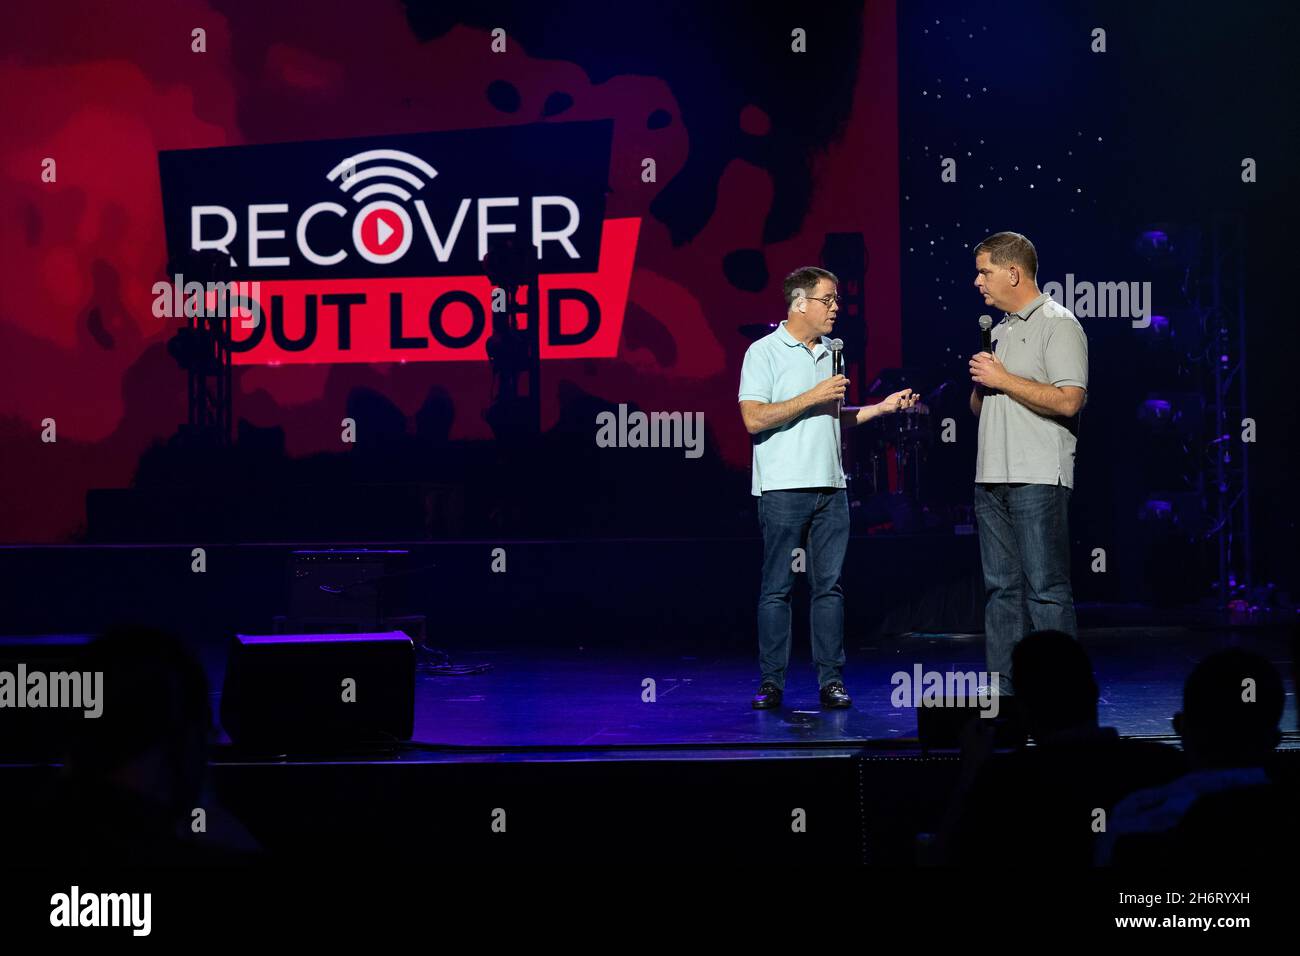 Washington, United States of America. 28 September, 2021. U.S Secretary of Labor Marty Walsh, right, delivers remarks onstage with Ryan Hampton at the Recovery Out Loud Concert during the Mobilize Recovery Conference September 28, 2021 in Las Vegas, Nevada.   Credit: Shawn T Moore/Dept of Labor/Alamy Live News Stock Photo